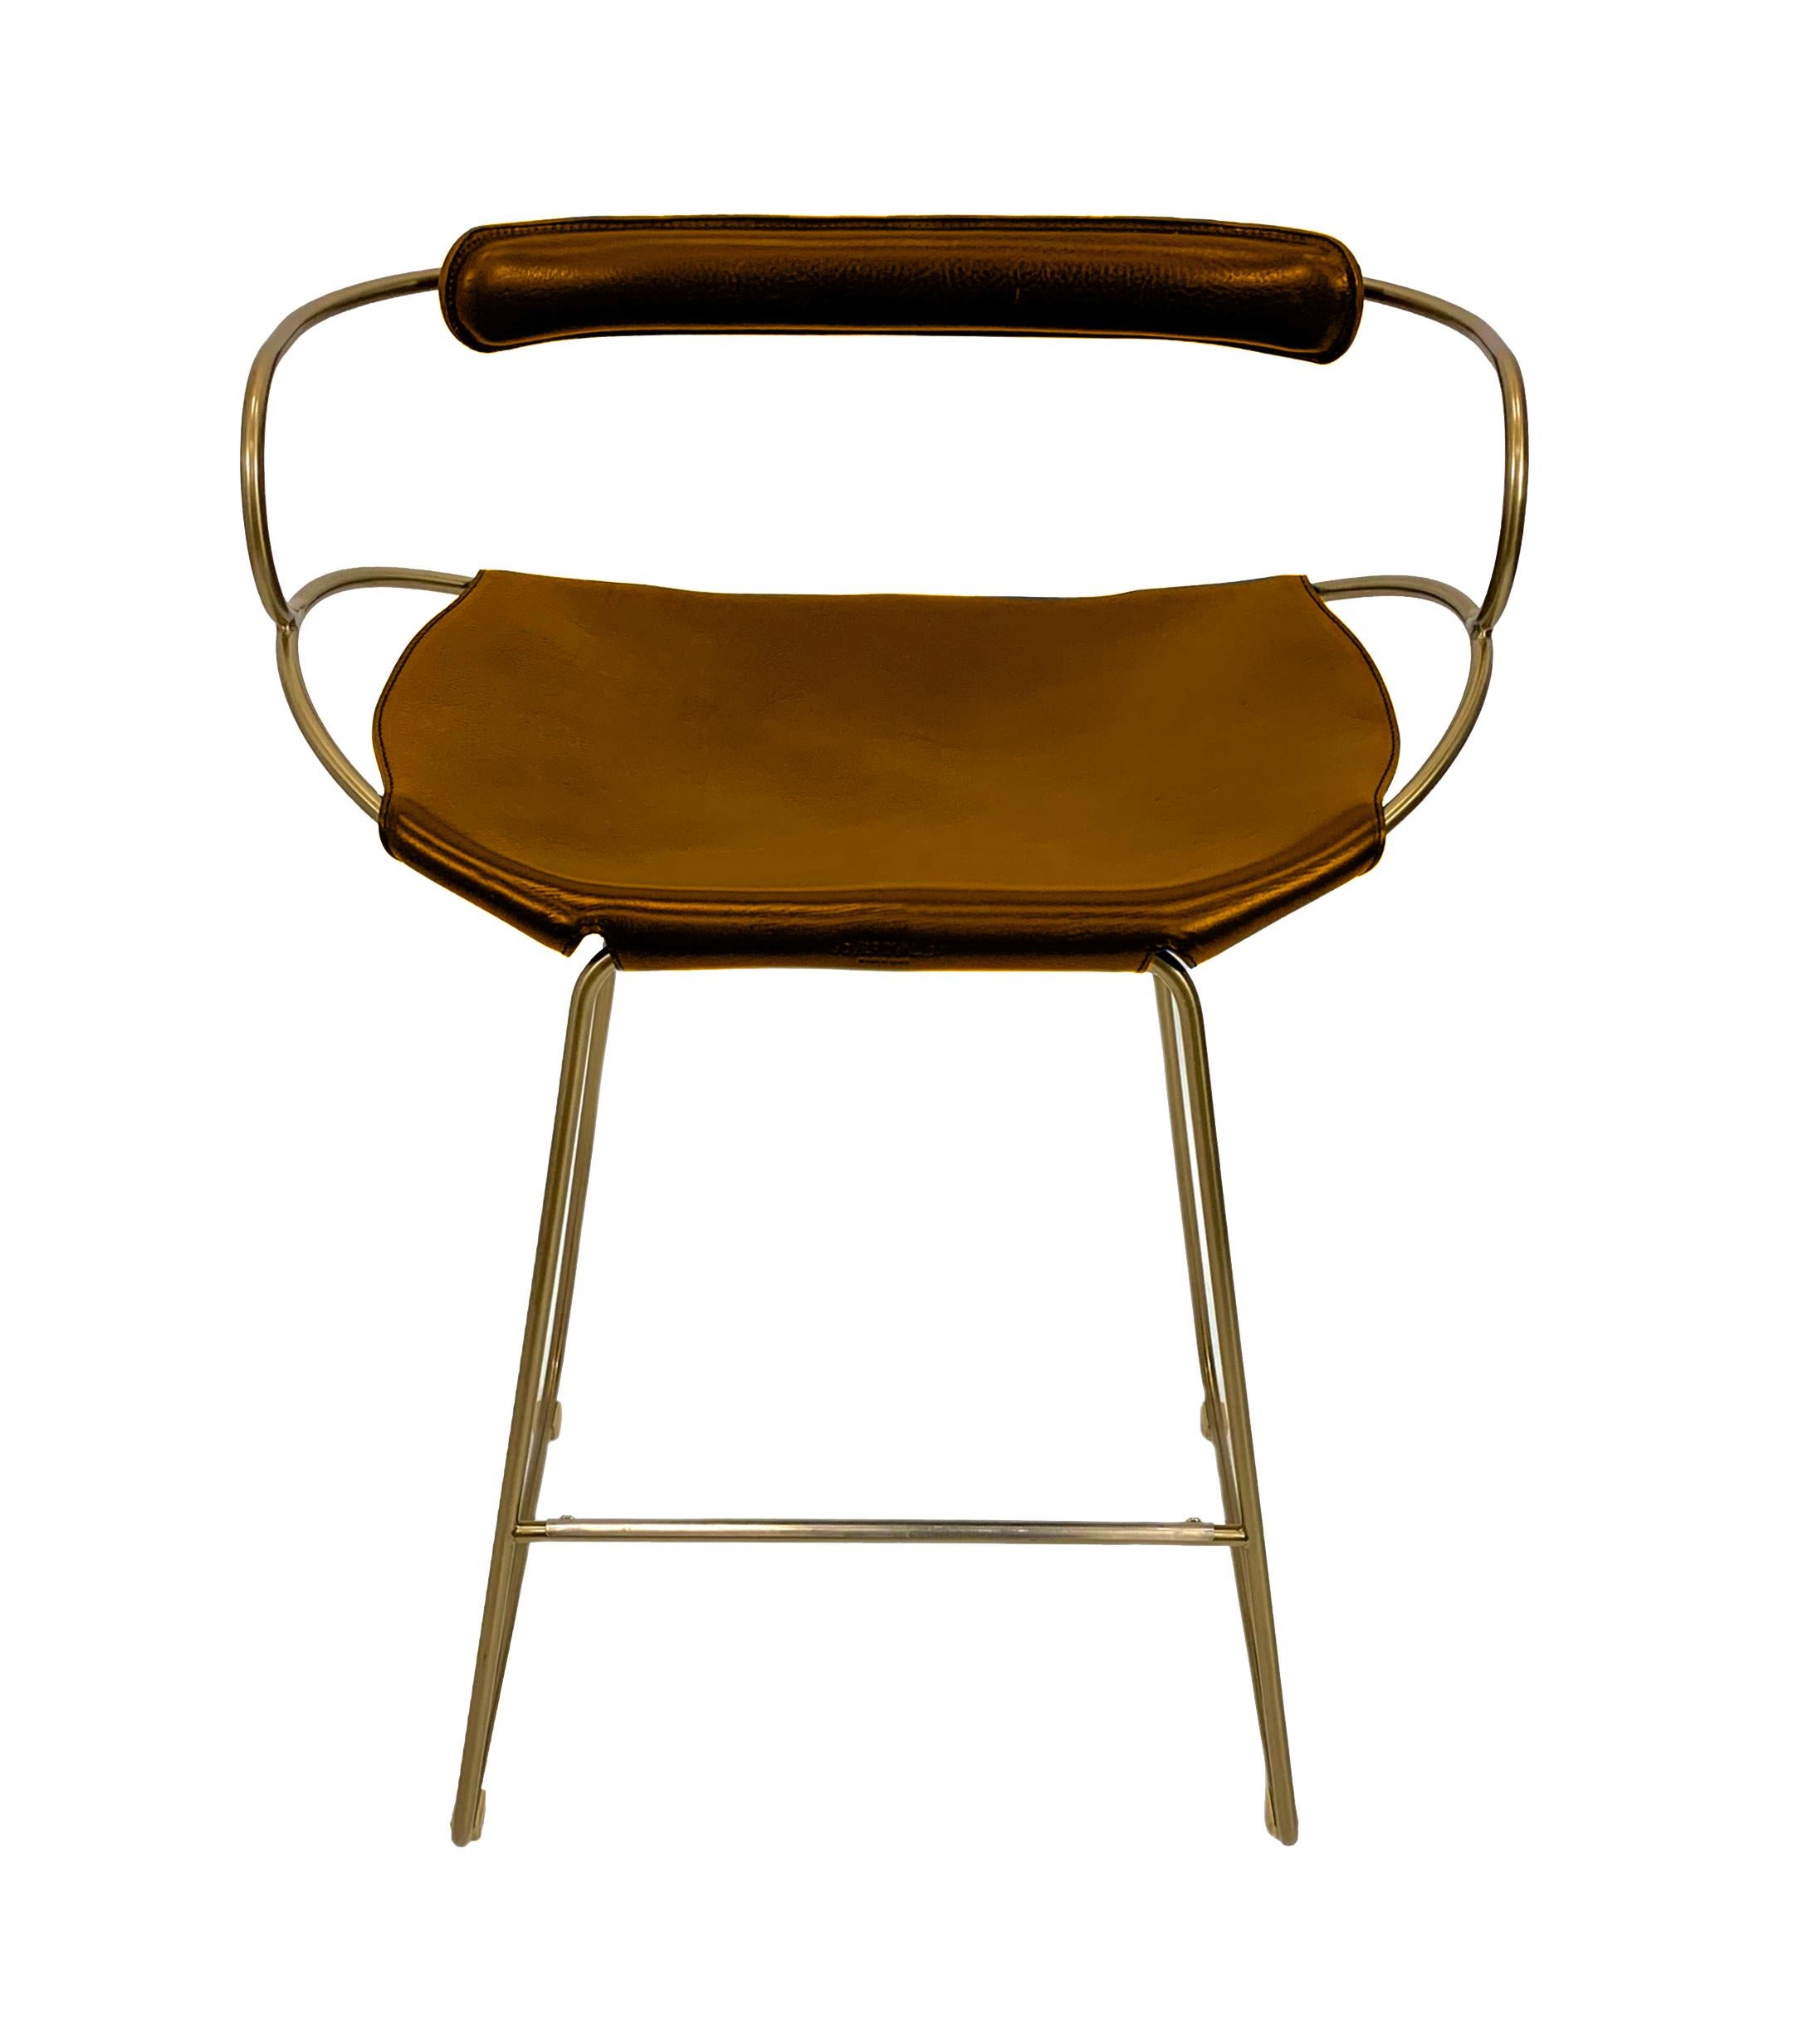 The Hug contemporary counter stool with backrest is designed and conceived with a light aesthetic, the slight oscillation of the steel rod of 12 mm is complemented by the flexibility of the double 3.5 mm thick leather. When sitting in this furniture